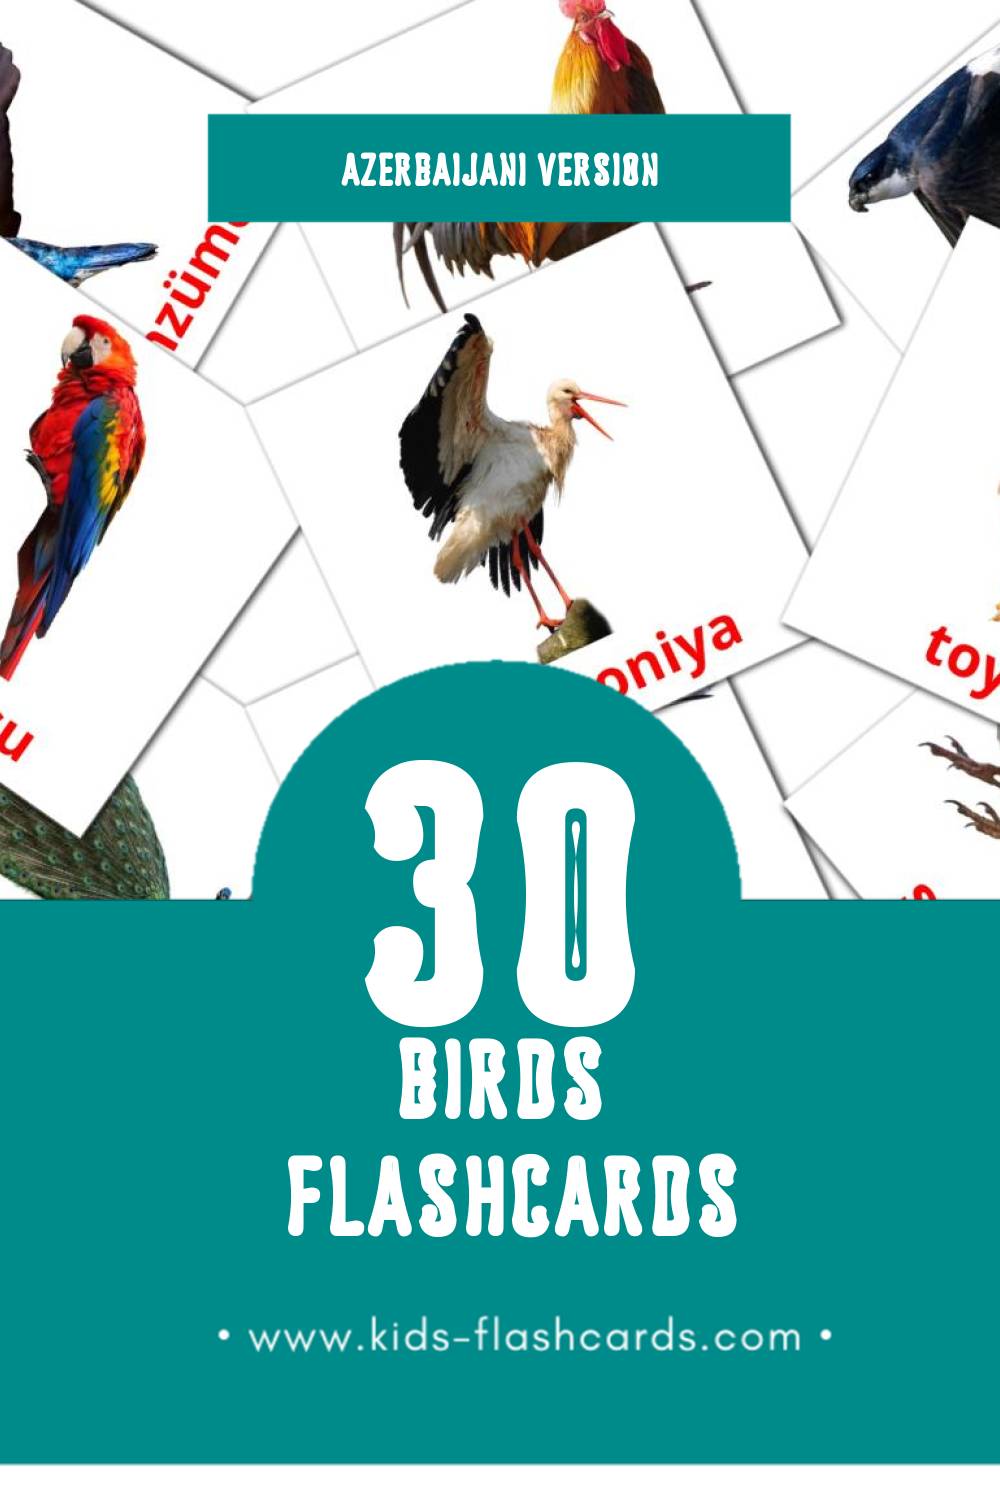 Visual Quşlar Flashcards for Toddlers (30 cards in Azerbaijani)